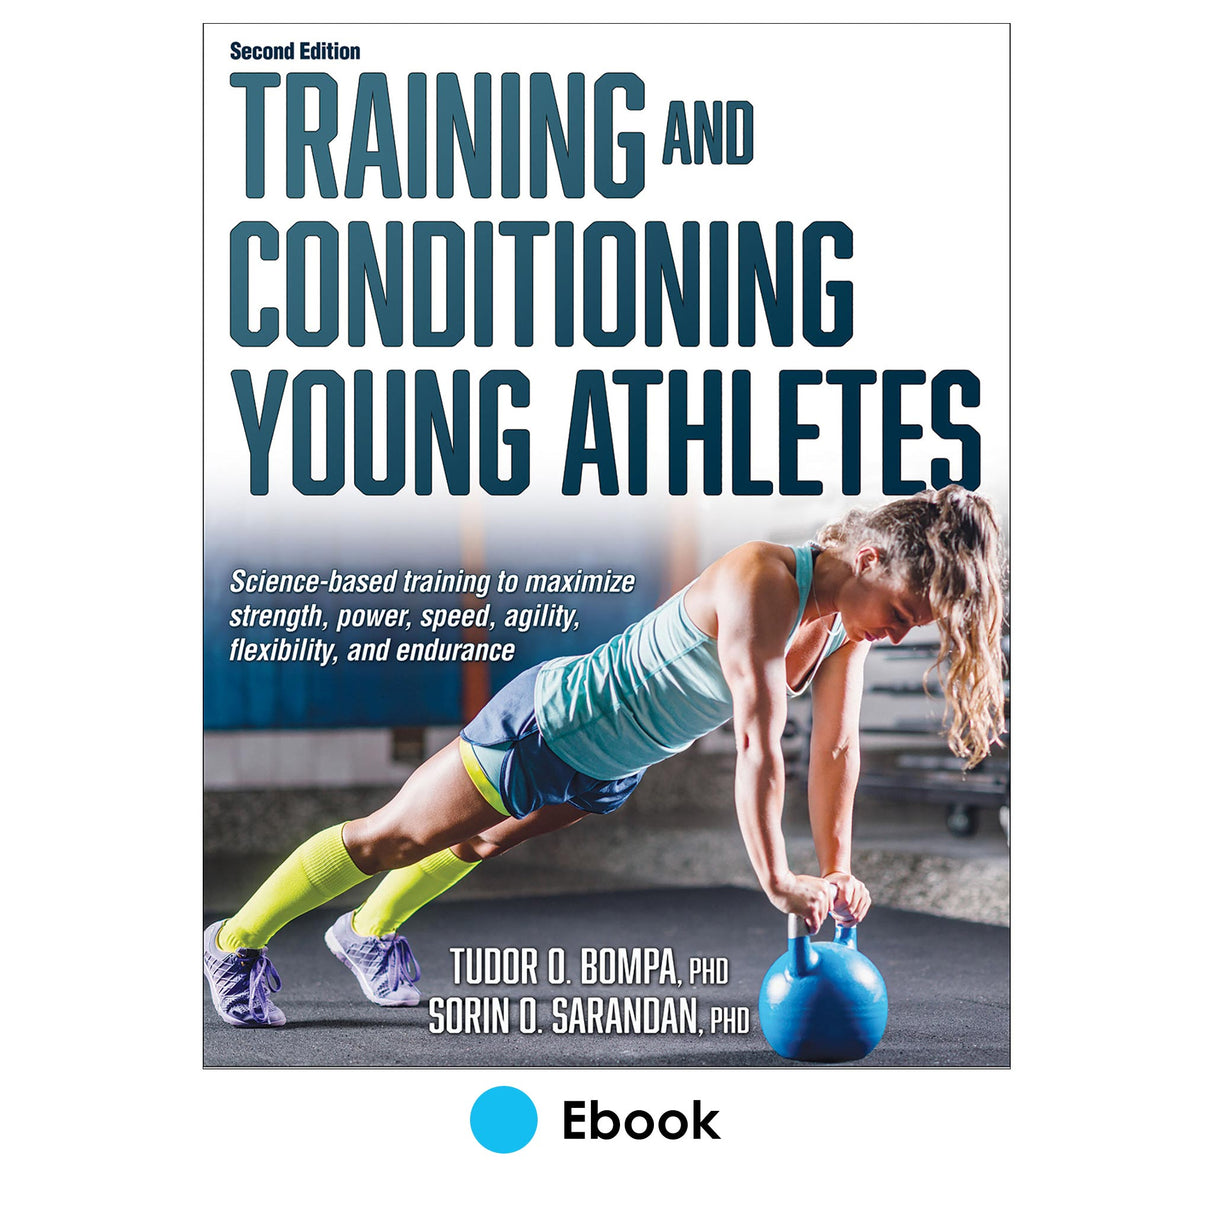 Training and Conditioning Young Athletes 2nd Edition epub